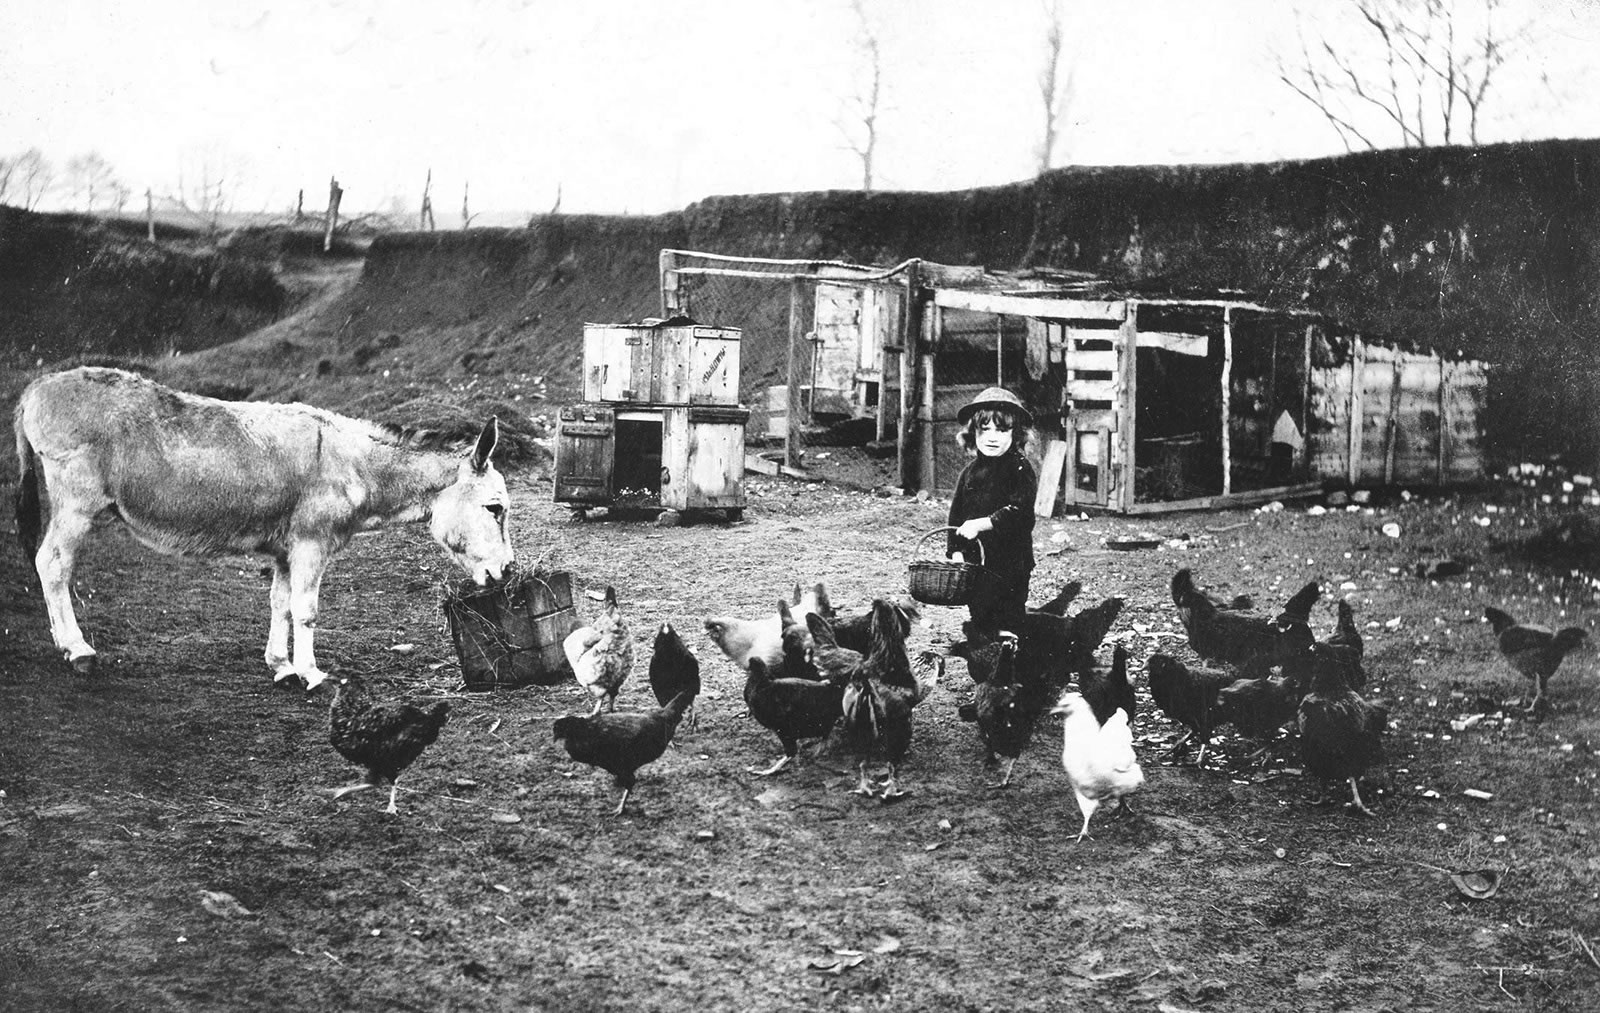 Image of a black and white photograph of a young boy feeding a group of chickens in a farmyard